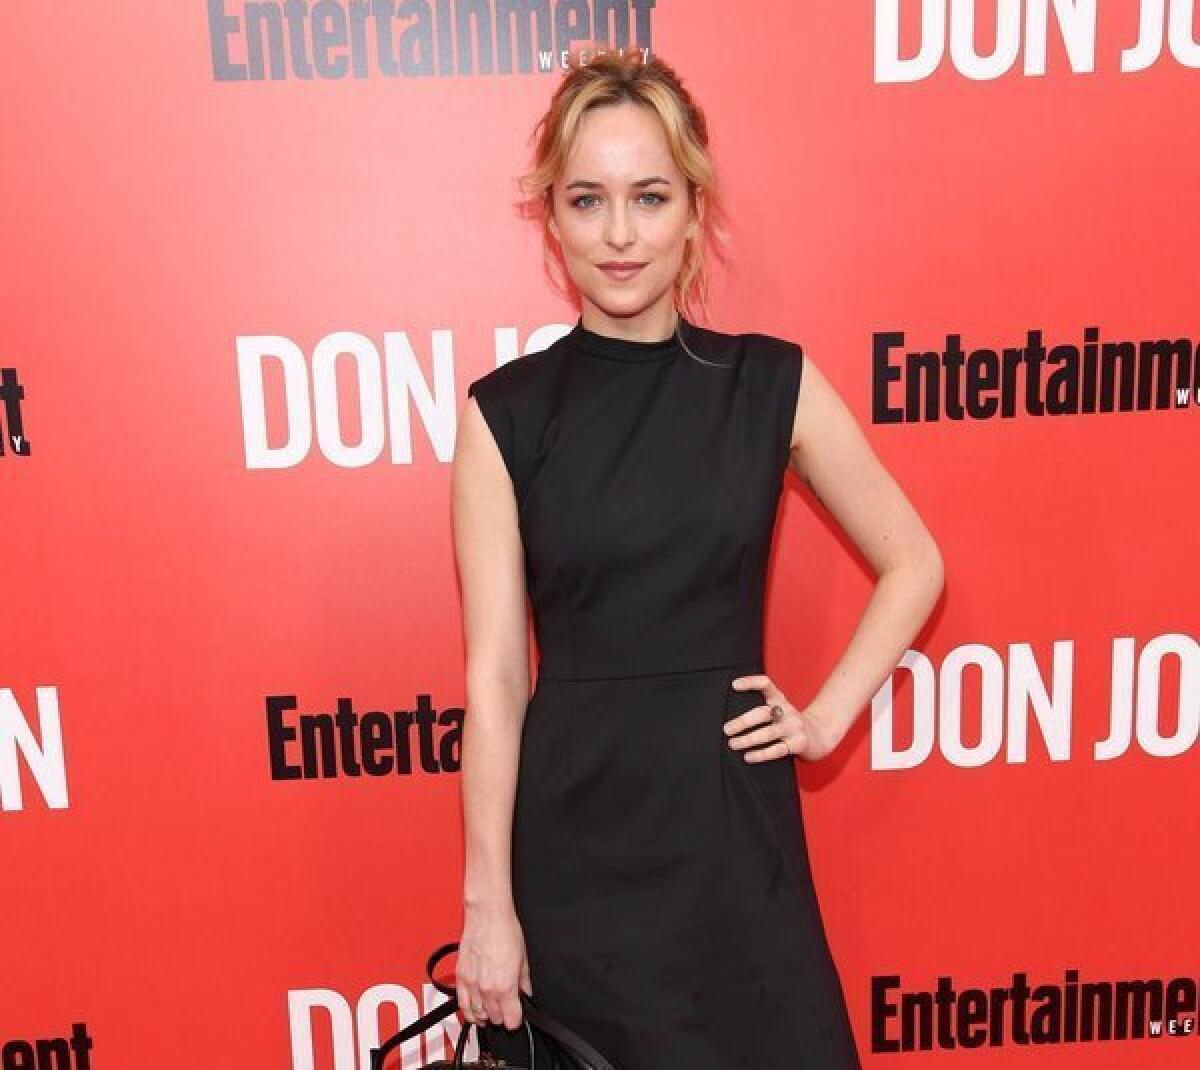 Actress Dakota Johnson, said to be sticking with the "Fifty Shades of Grey" adaptation, is seen at the New York premiere of "Don Jon."